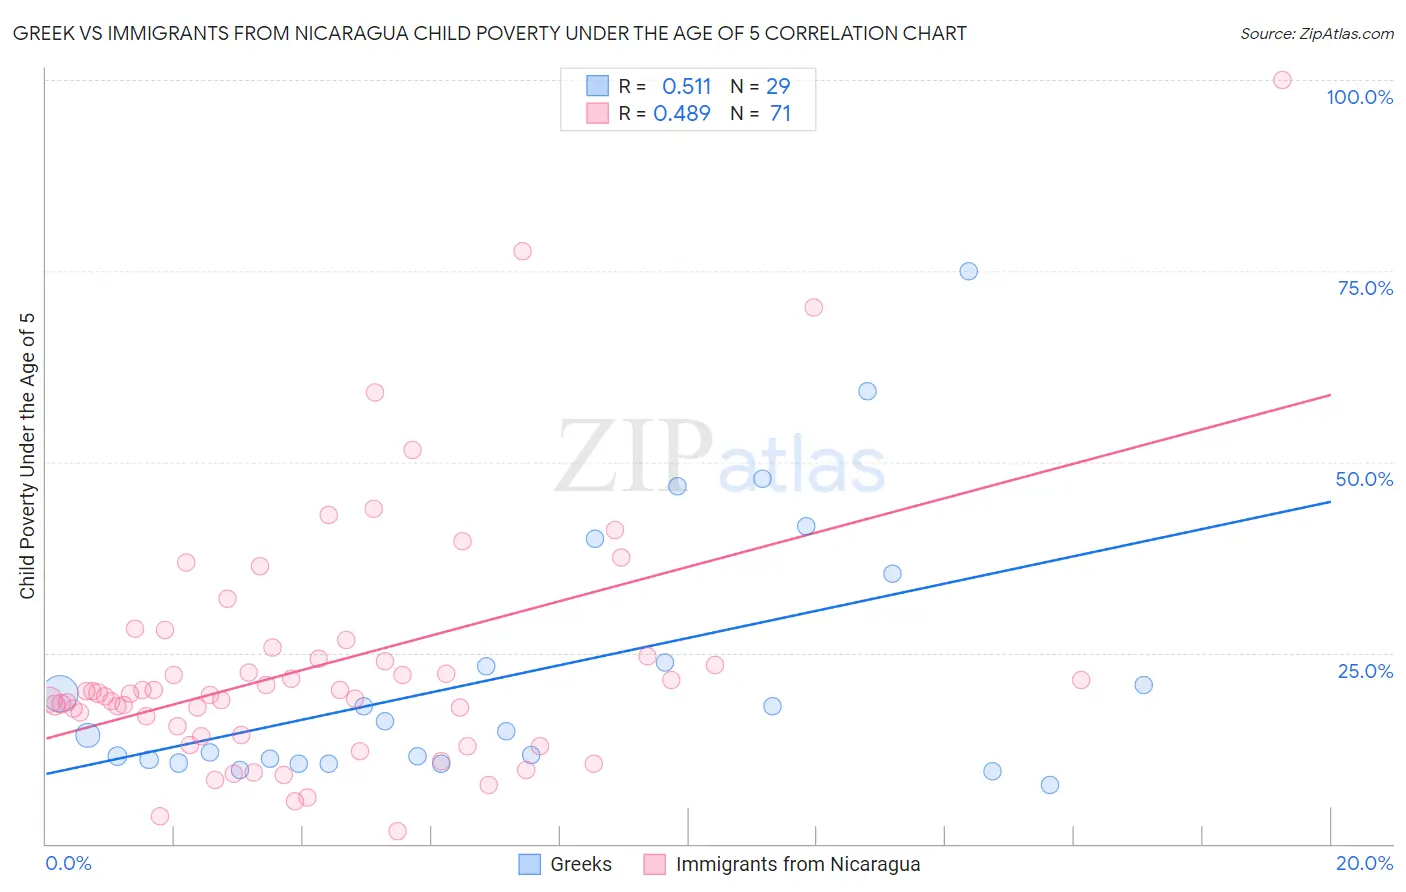 Greek vs Immigrants from Nicaragua Child Poverty Under the Age of 5